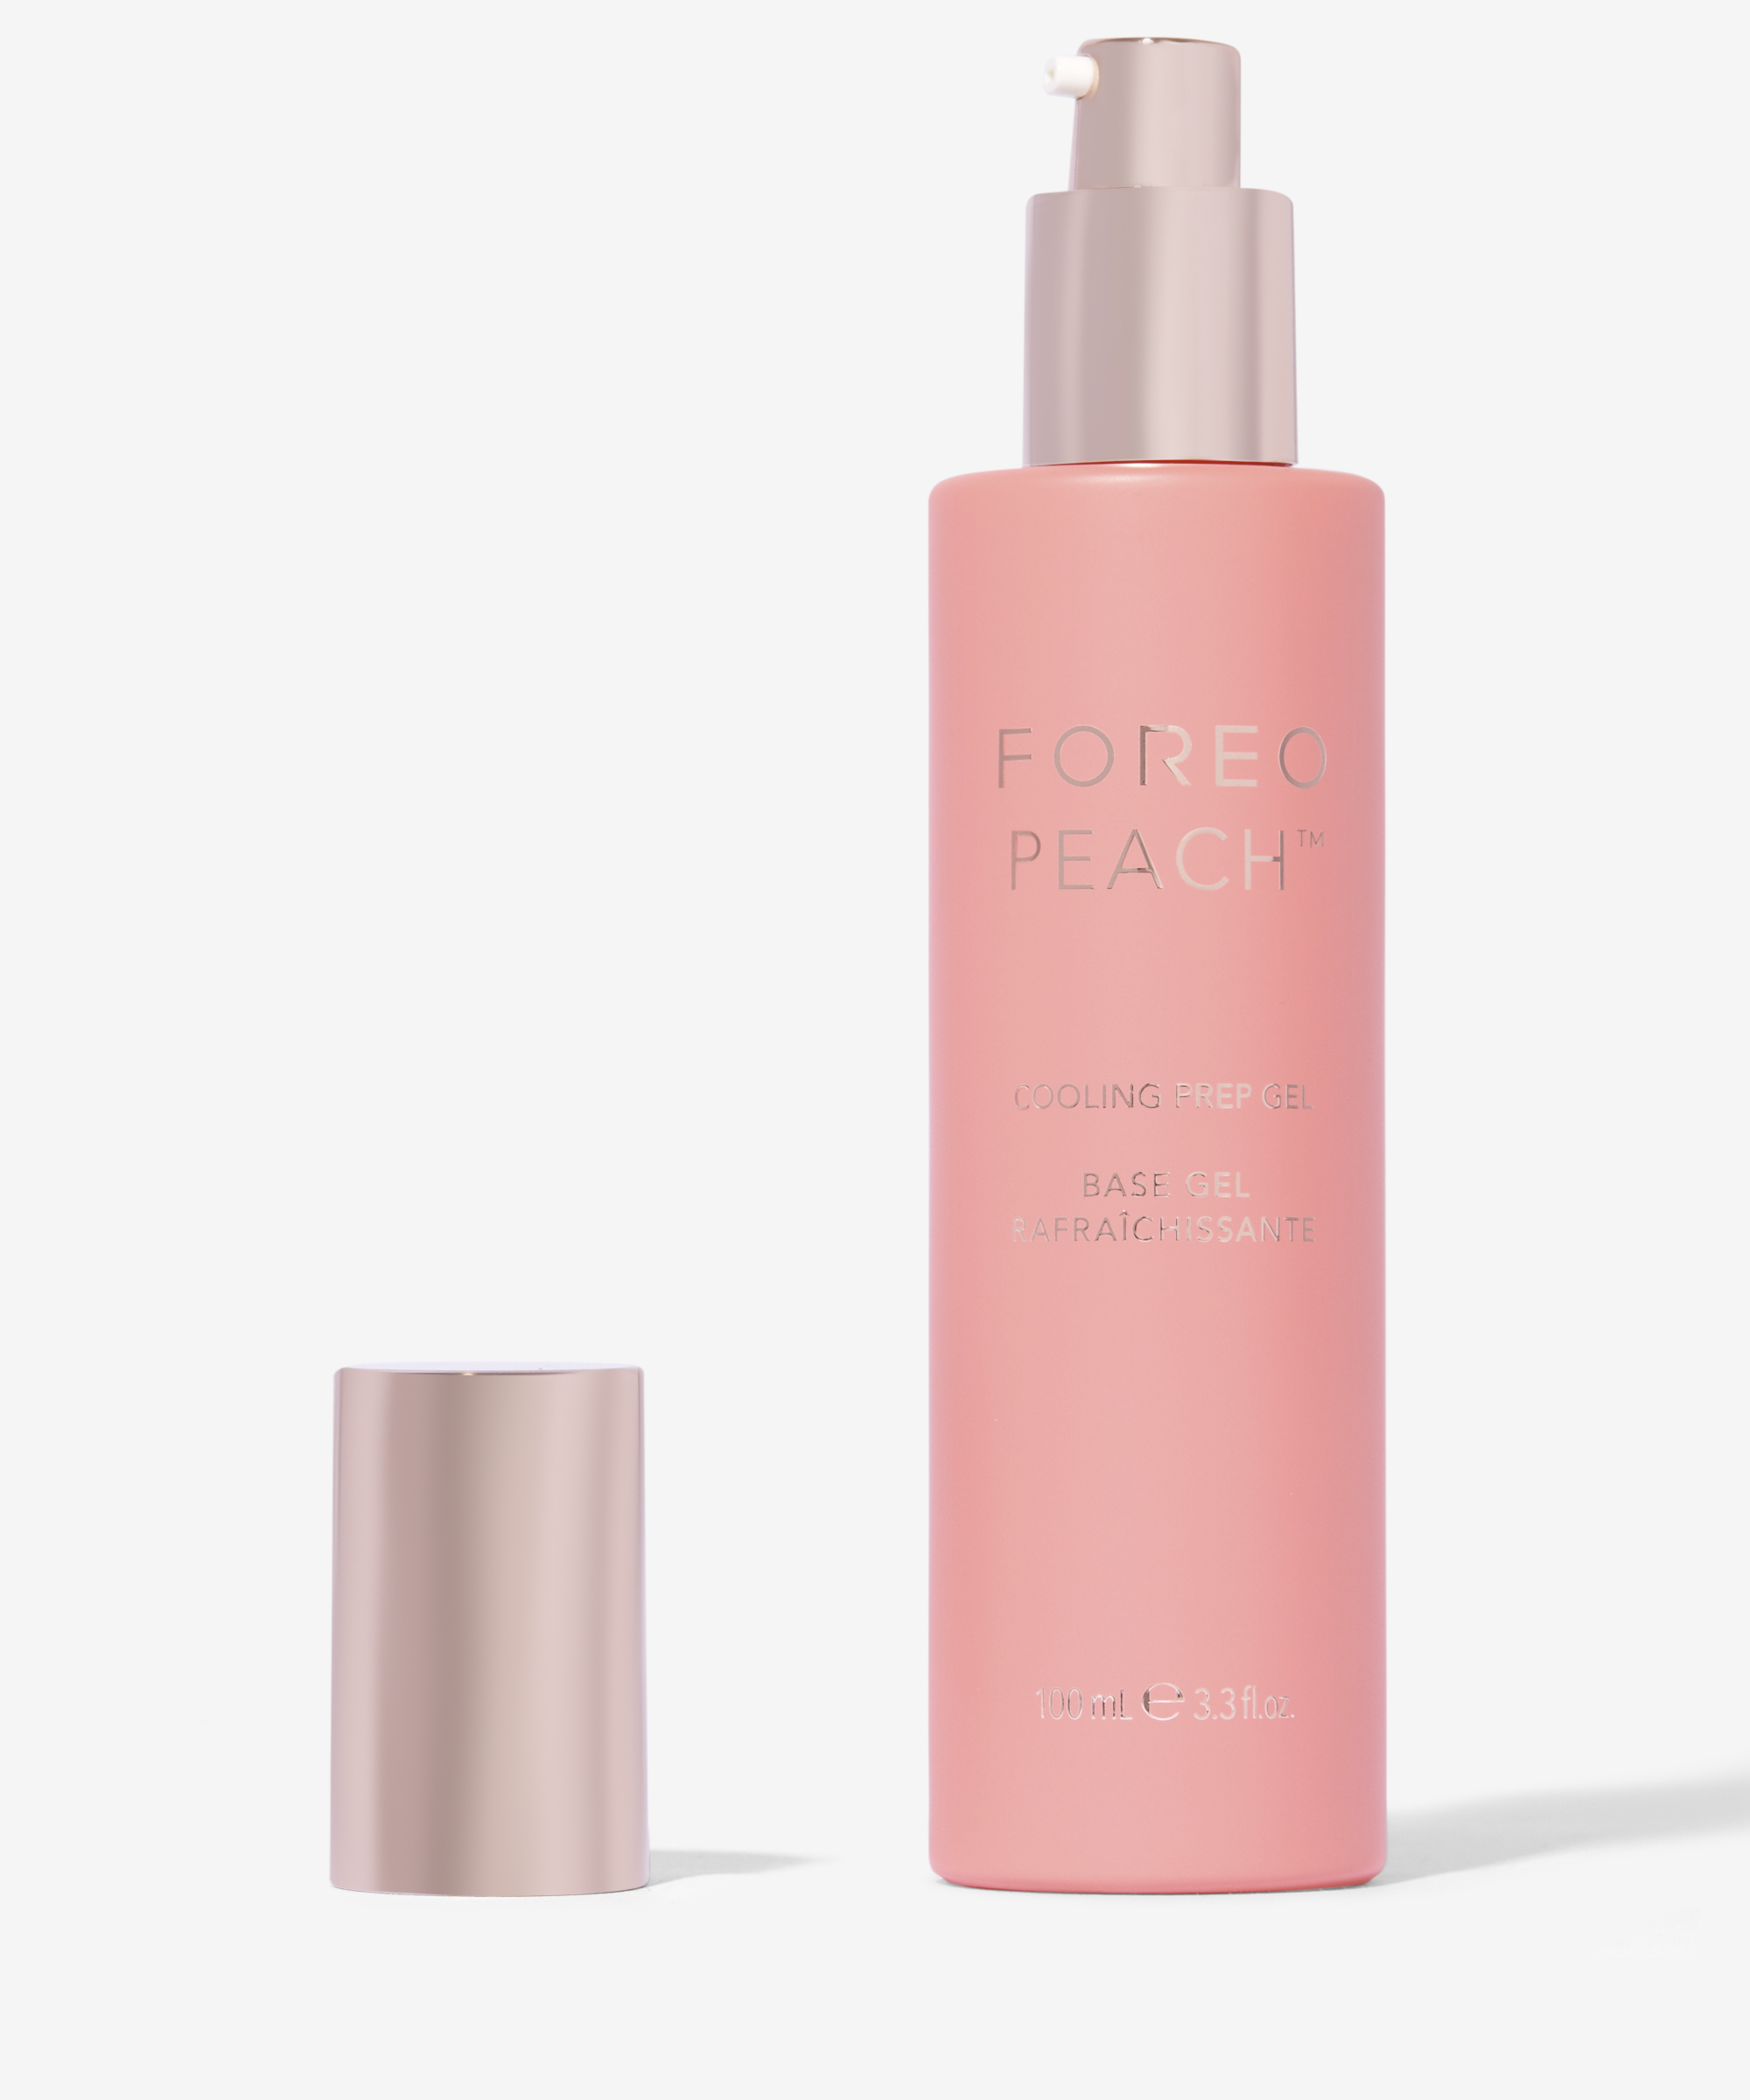 Foreo PEACH Cooling Prep Gel at BEAUTY BAY